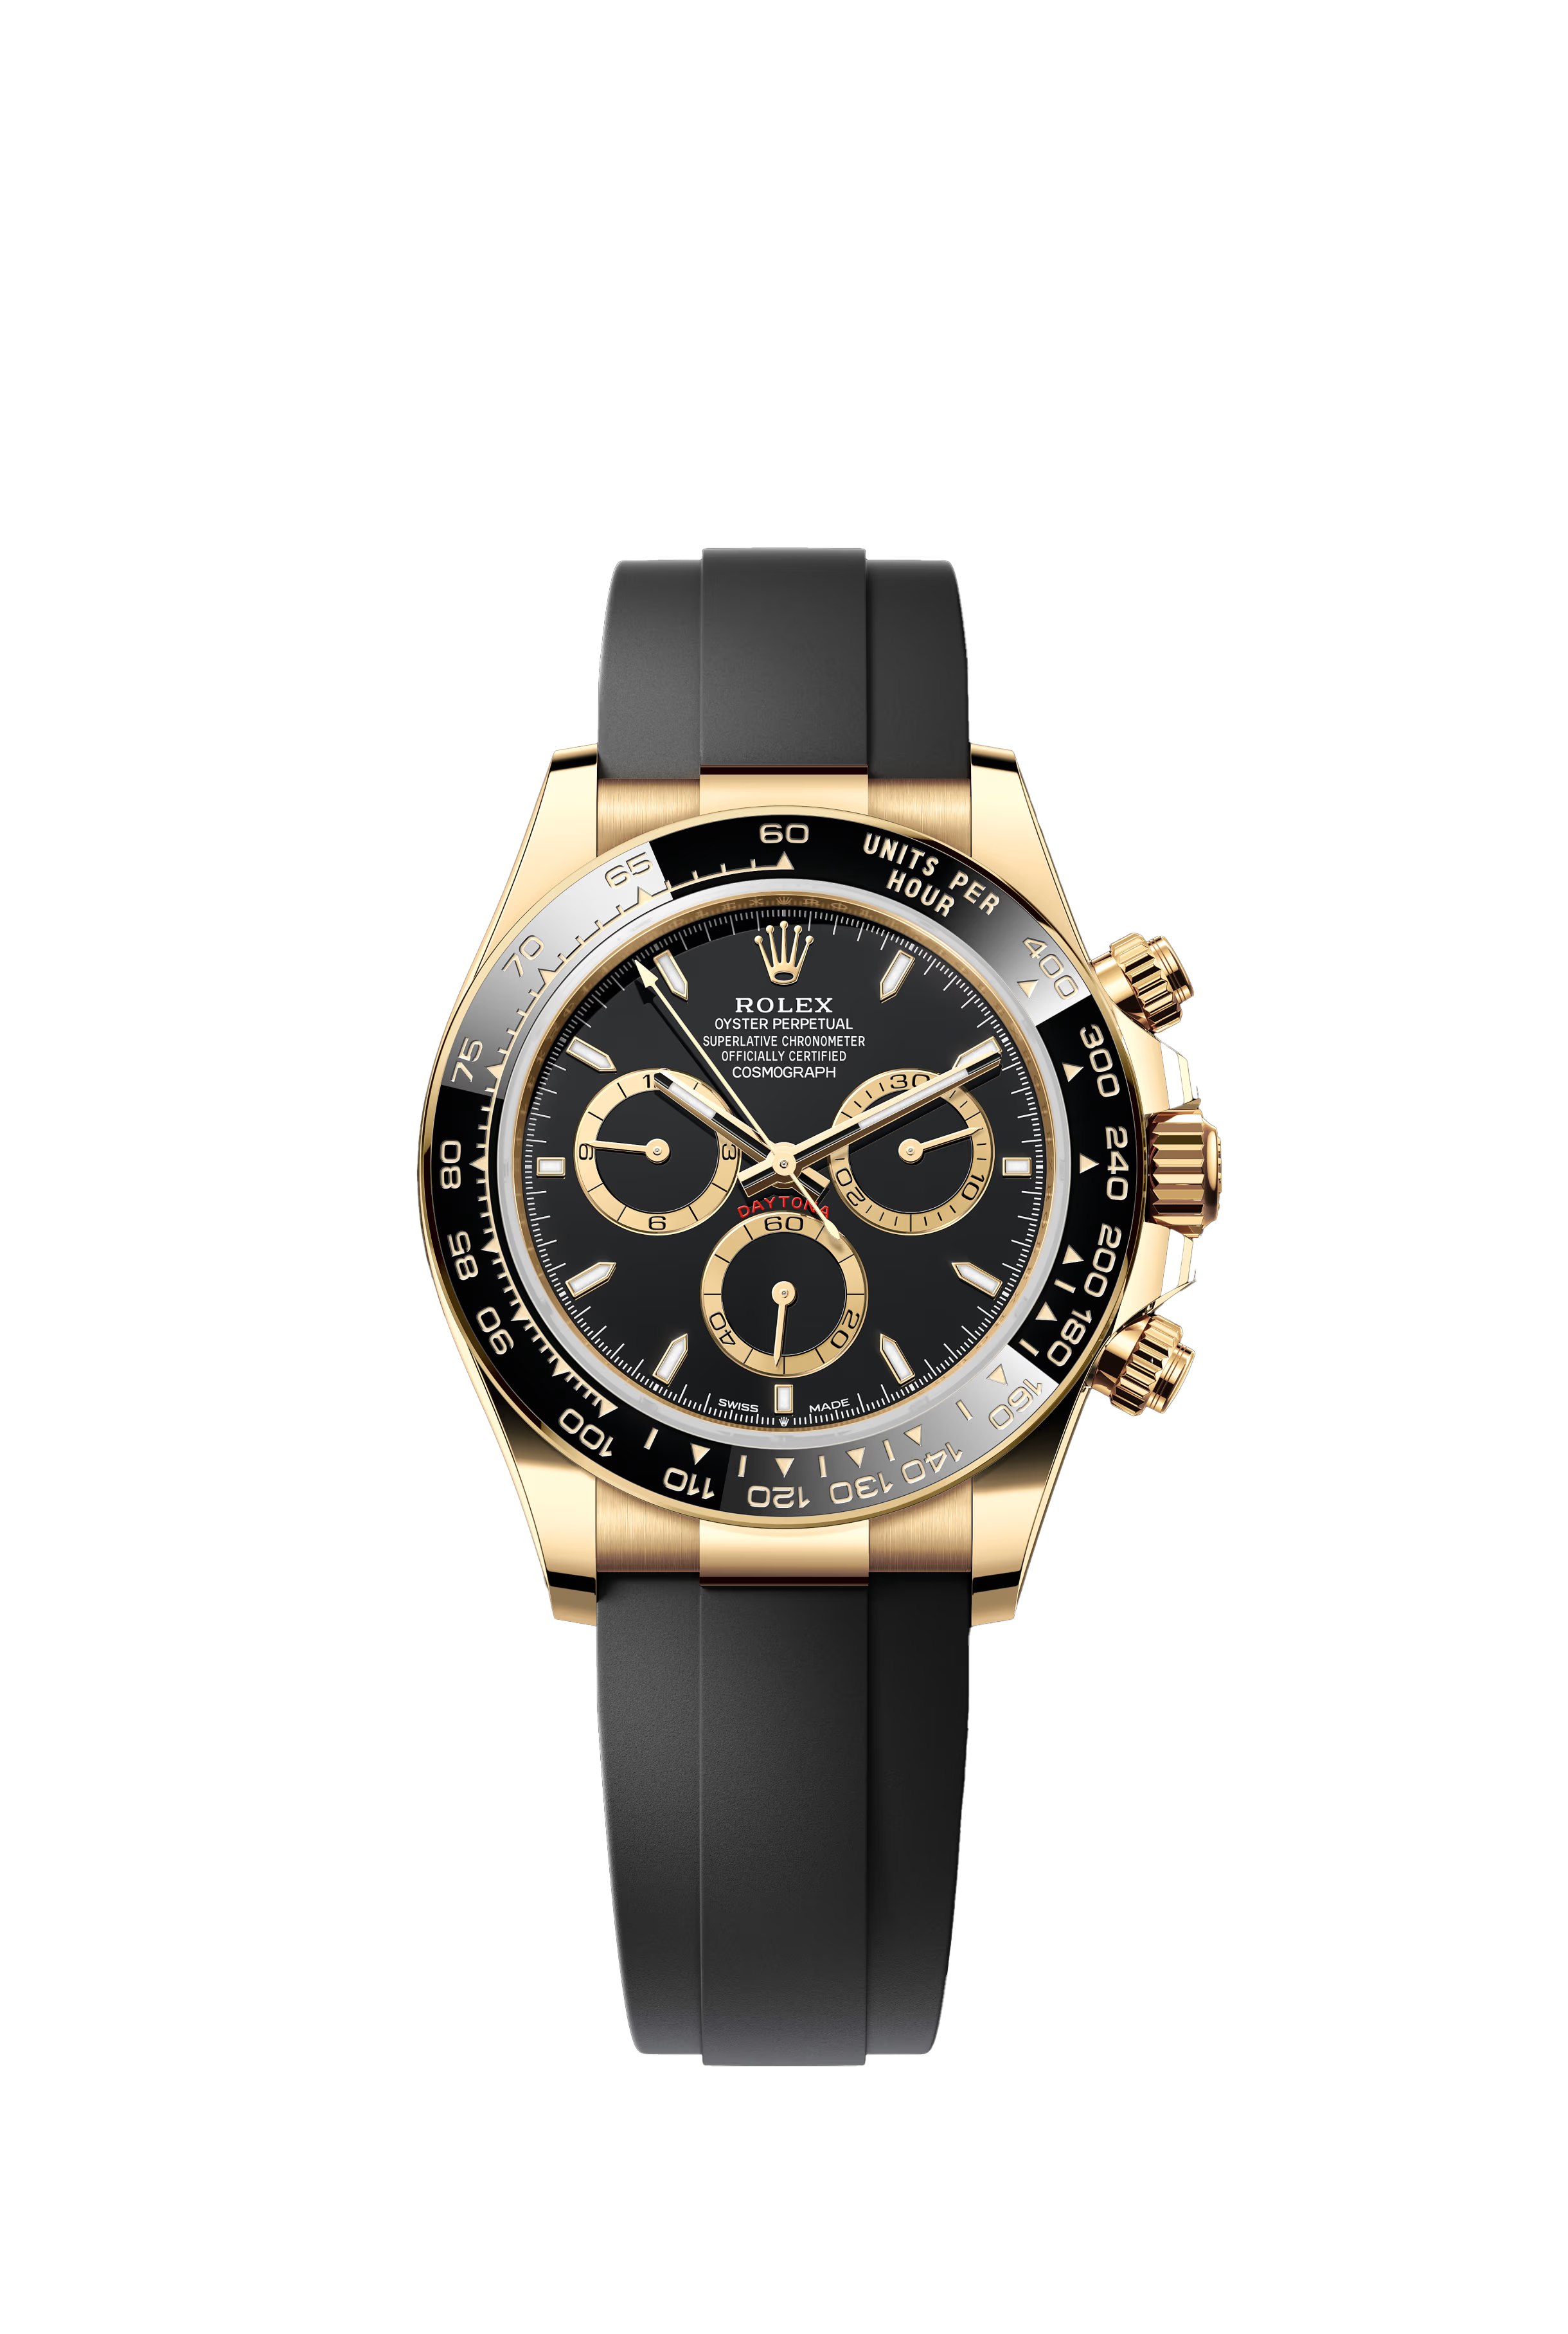 Rolex Cosmograph Daytona Oyster, 40 mm, yellow gold Reference 126518LN